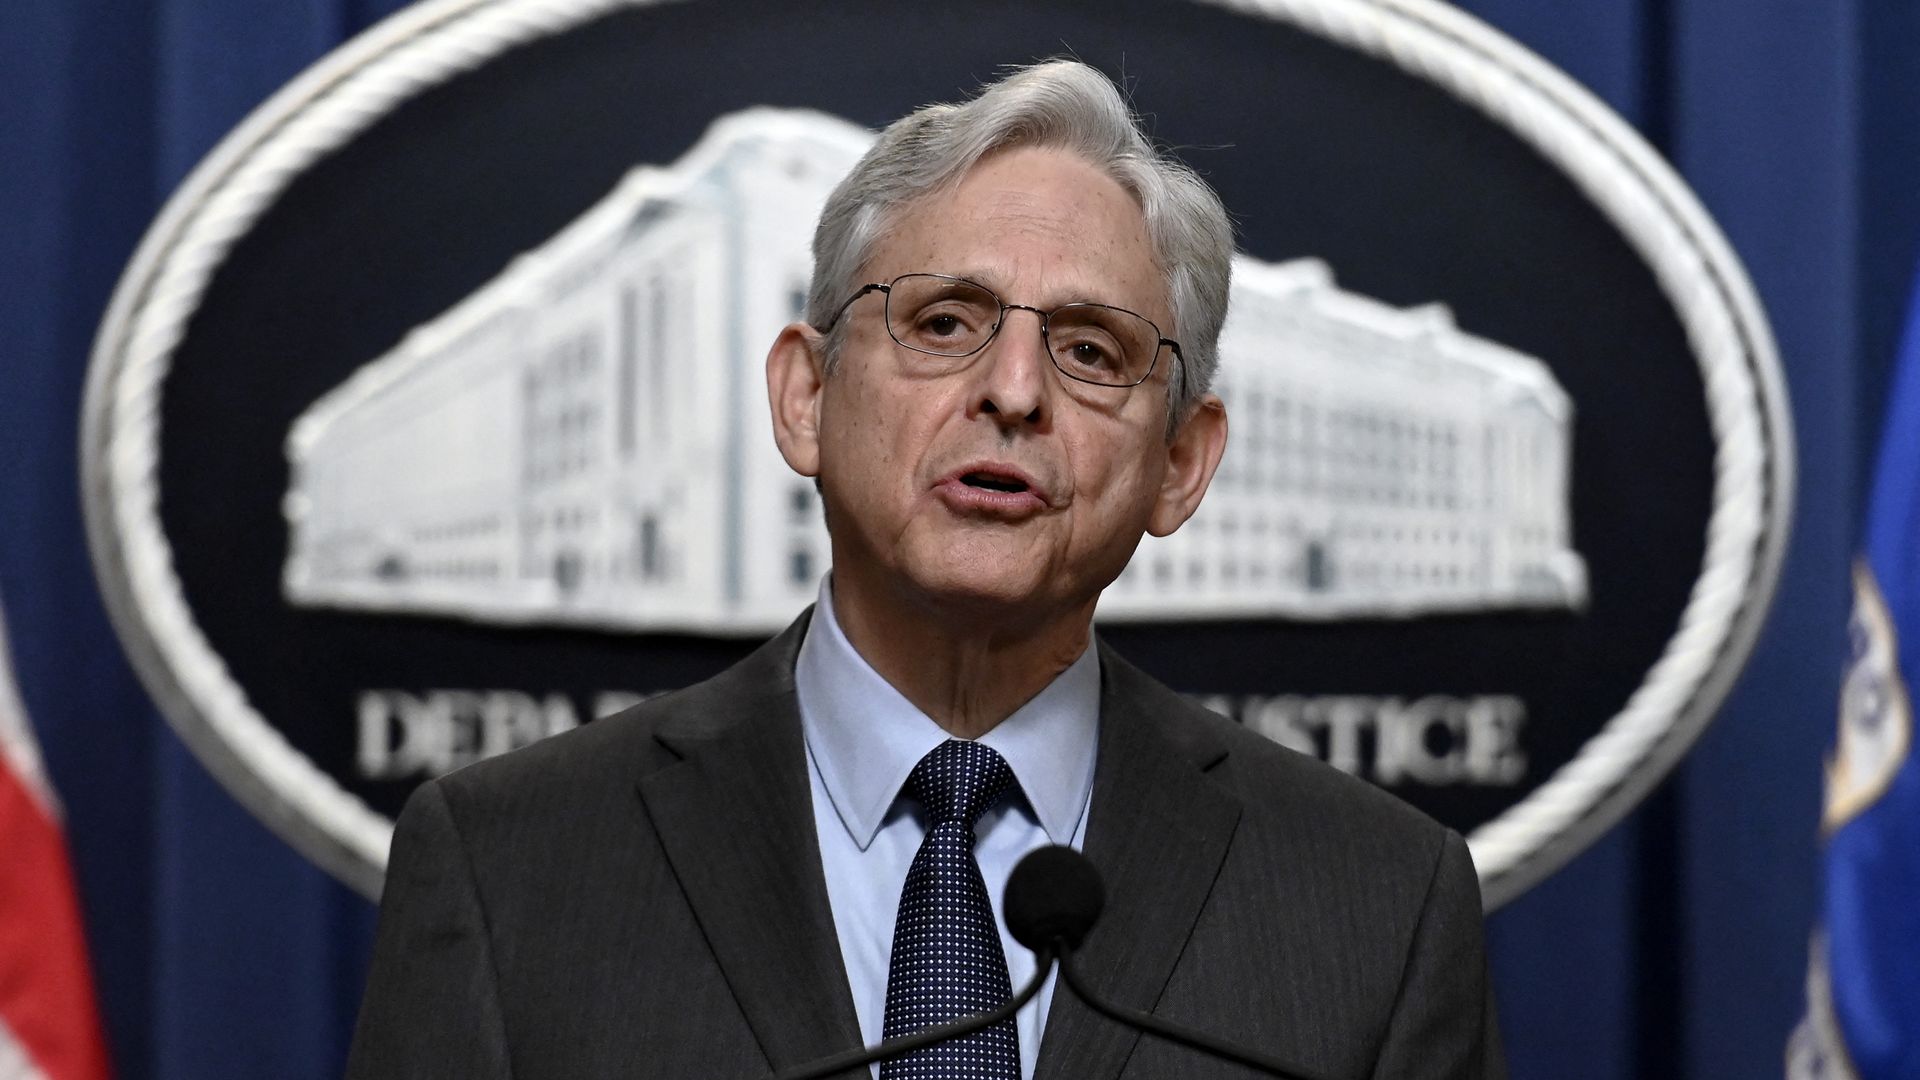 US Attorney General Merrick B. Garland speaks at the Justice Department in Washington, DC, on April 1, 2022.